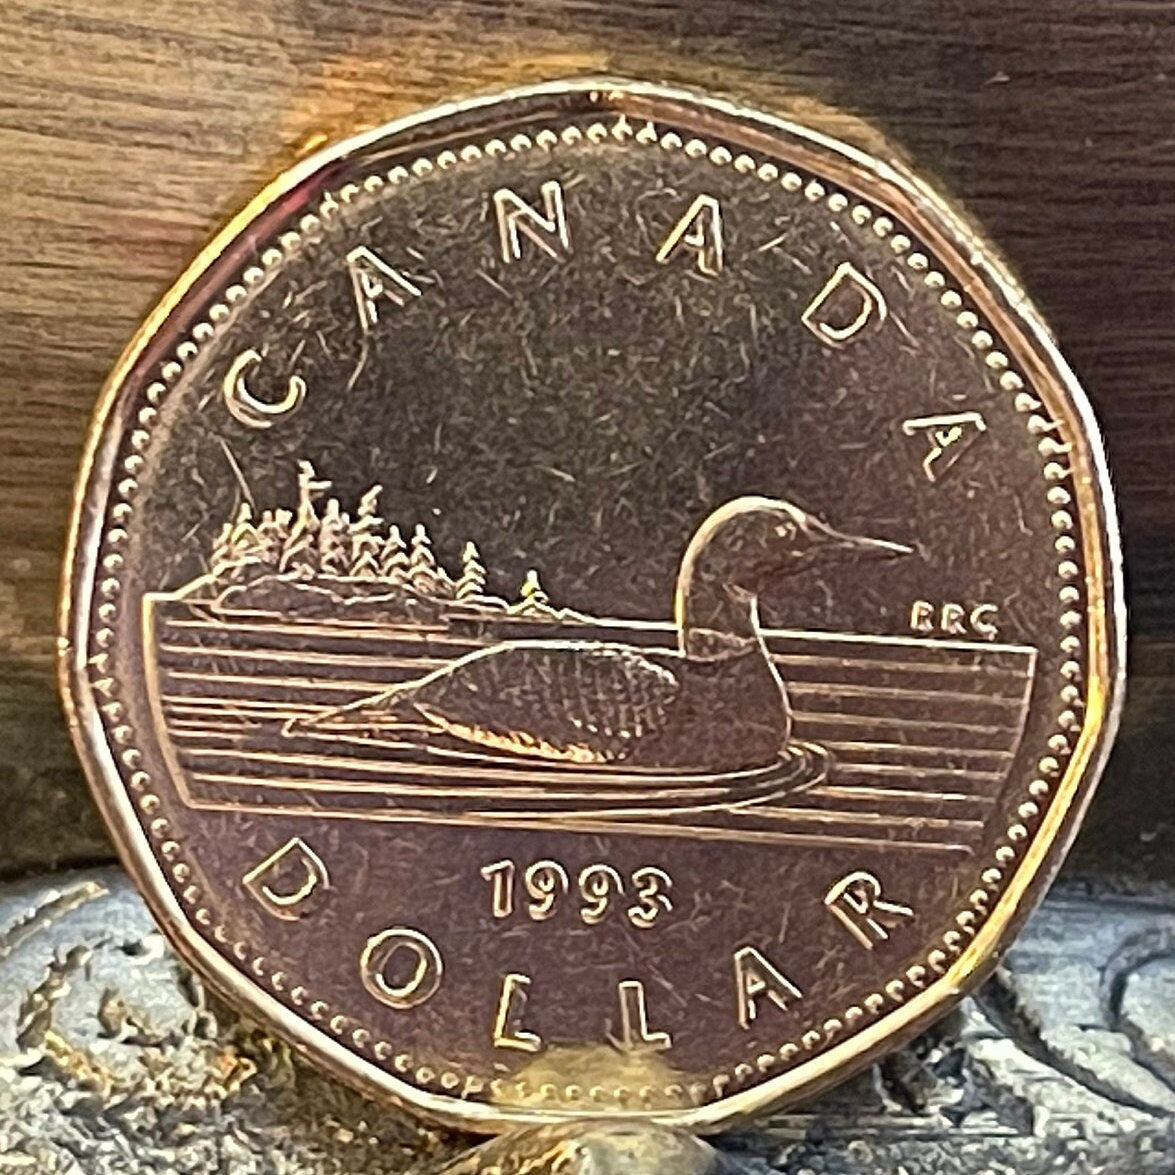 Loonie One Dollar Canada Authentic Coin Money for Jewelry and Craft Making (Canadian Loon) (Hendecagonal) (11-sided)